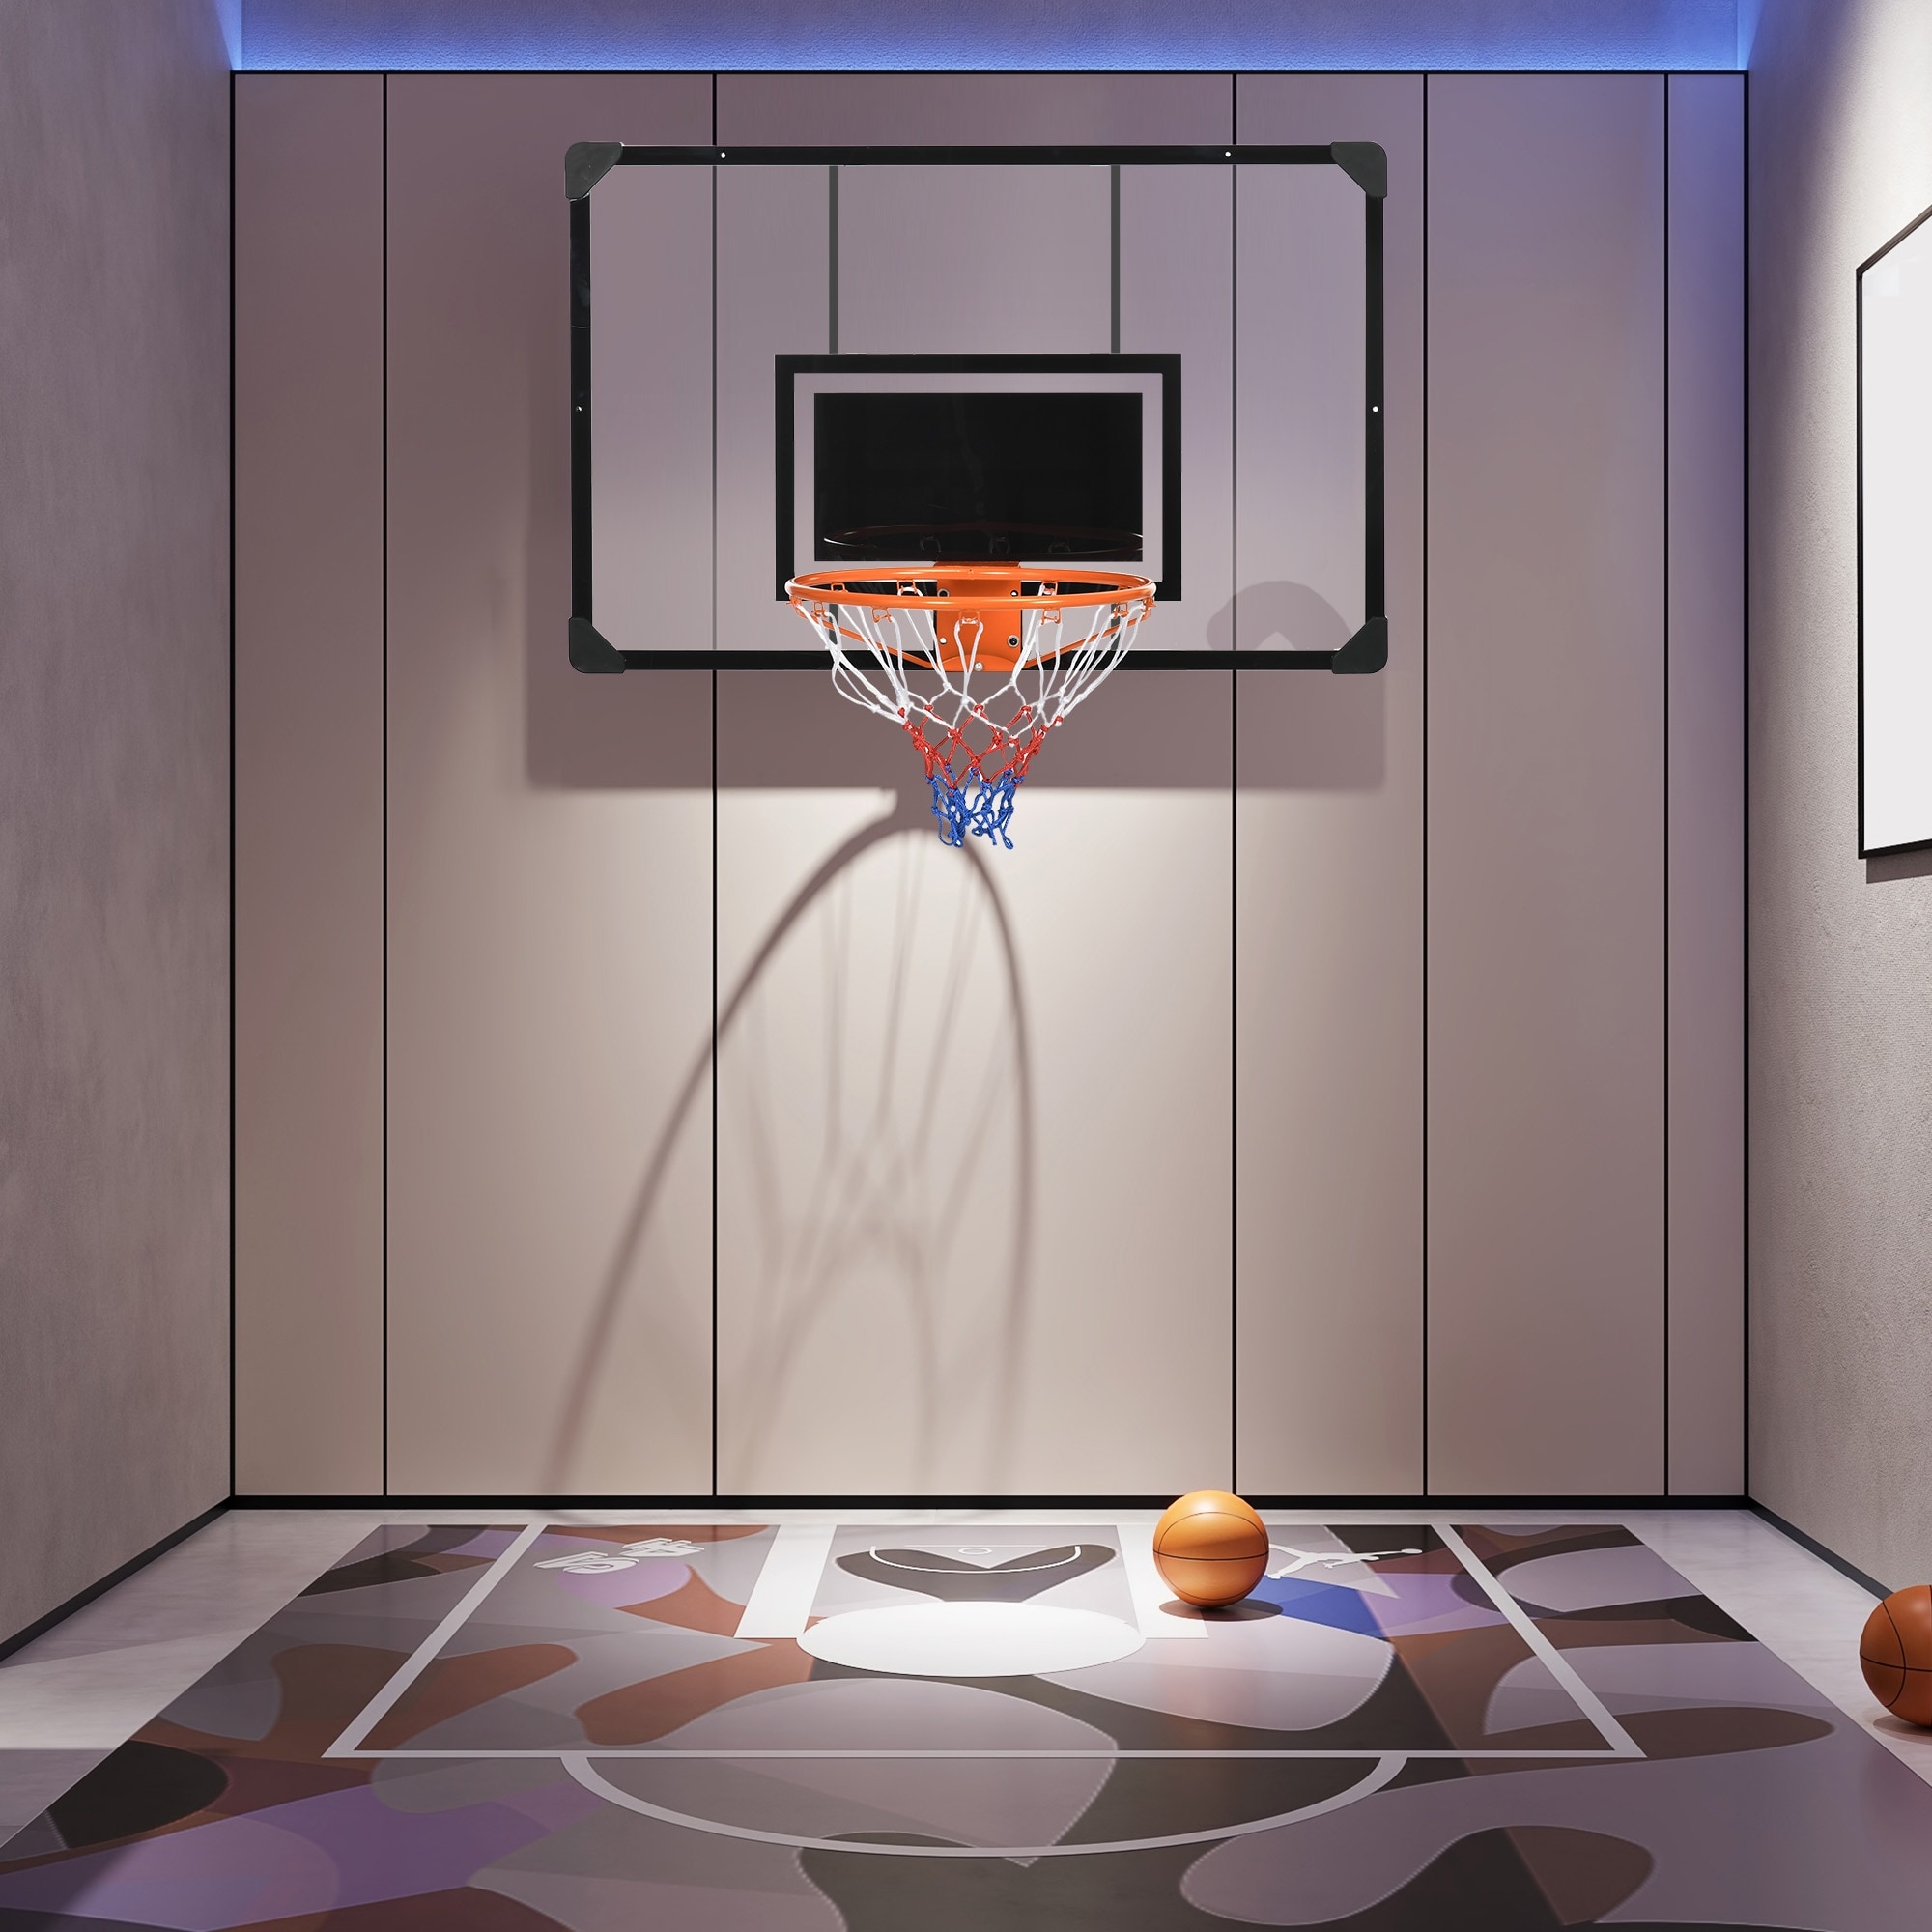 Soozier Wall Mounted Basketball Hoop, Mini Hoop with 45'' x 29'' Shatter  Proof Backboard, Durable Rim and All-Weather Net